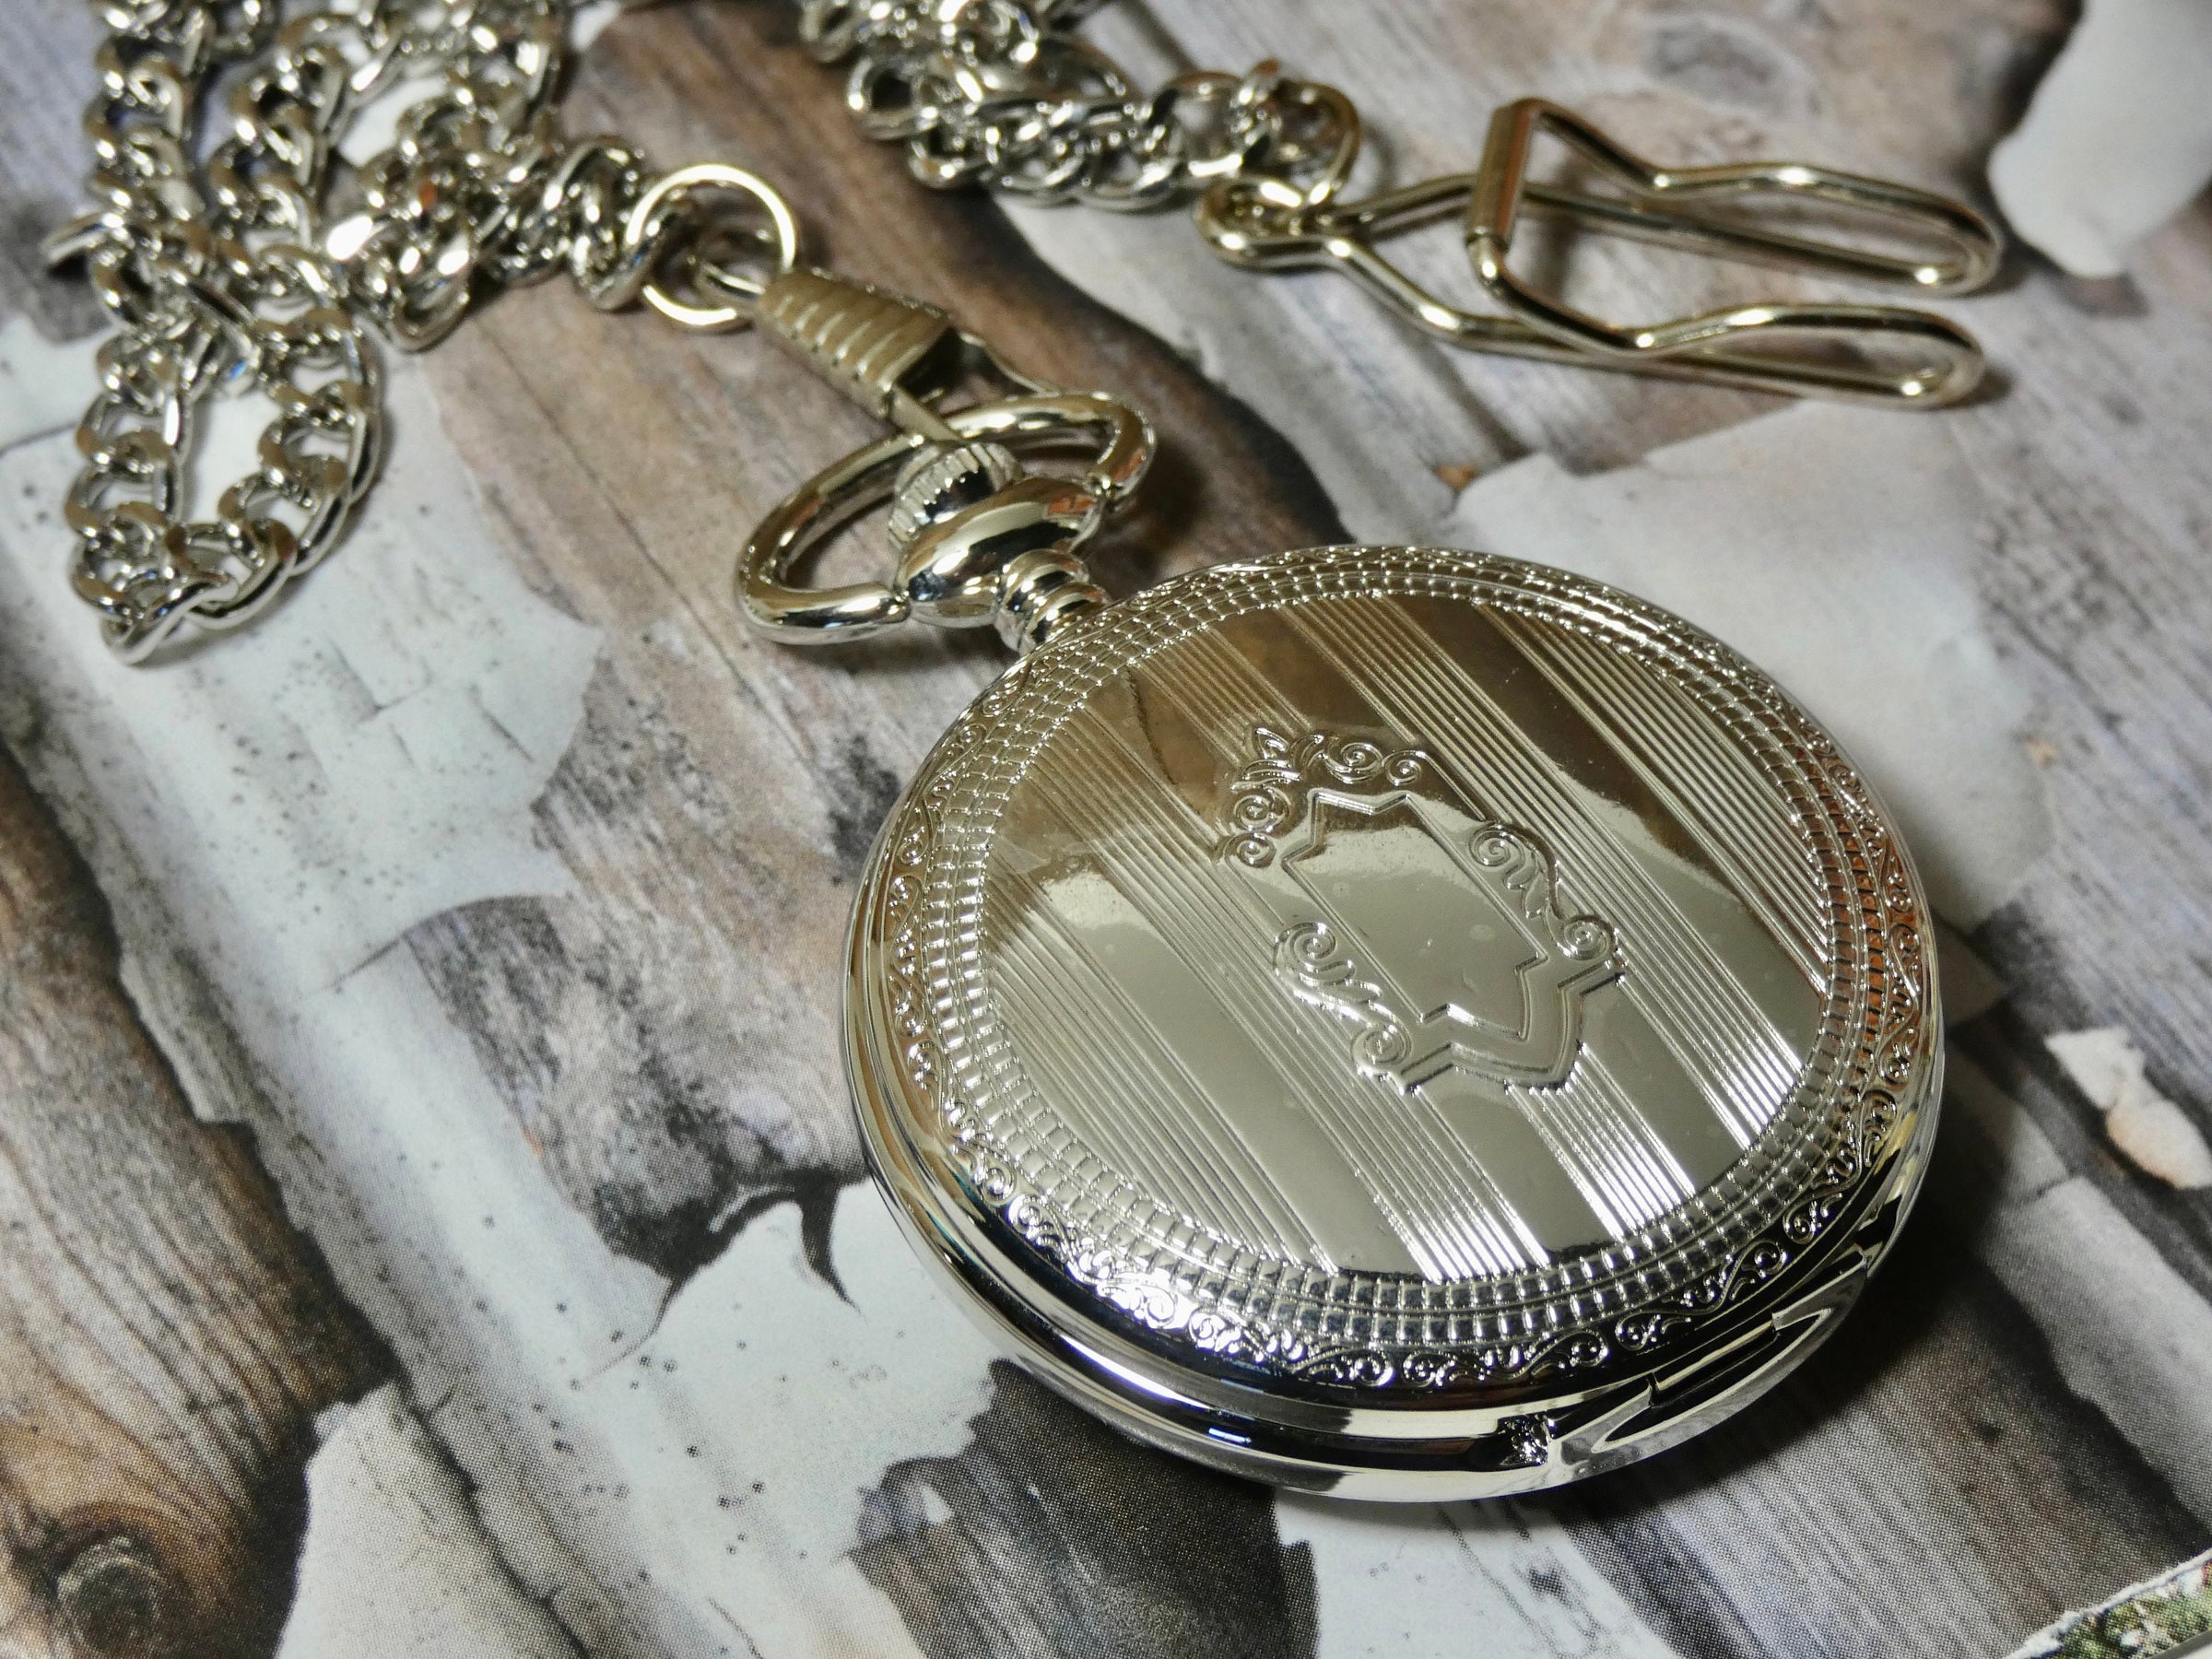 Mechanical Pocket Watch with Fob, Silver with Stripe Design and Black Face